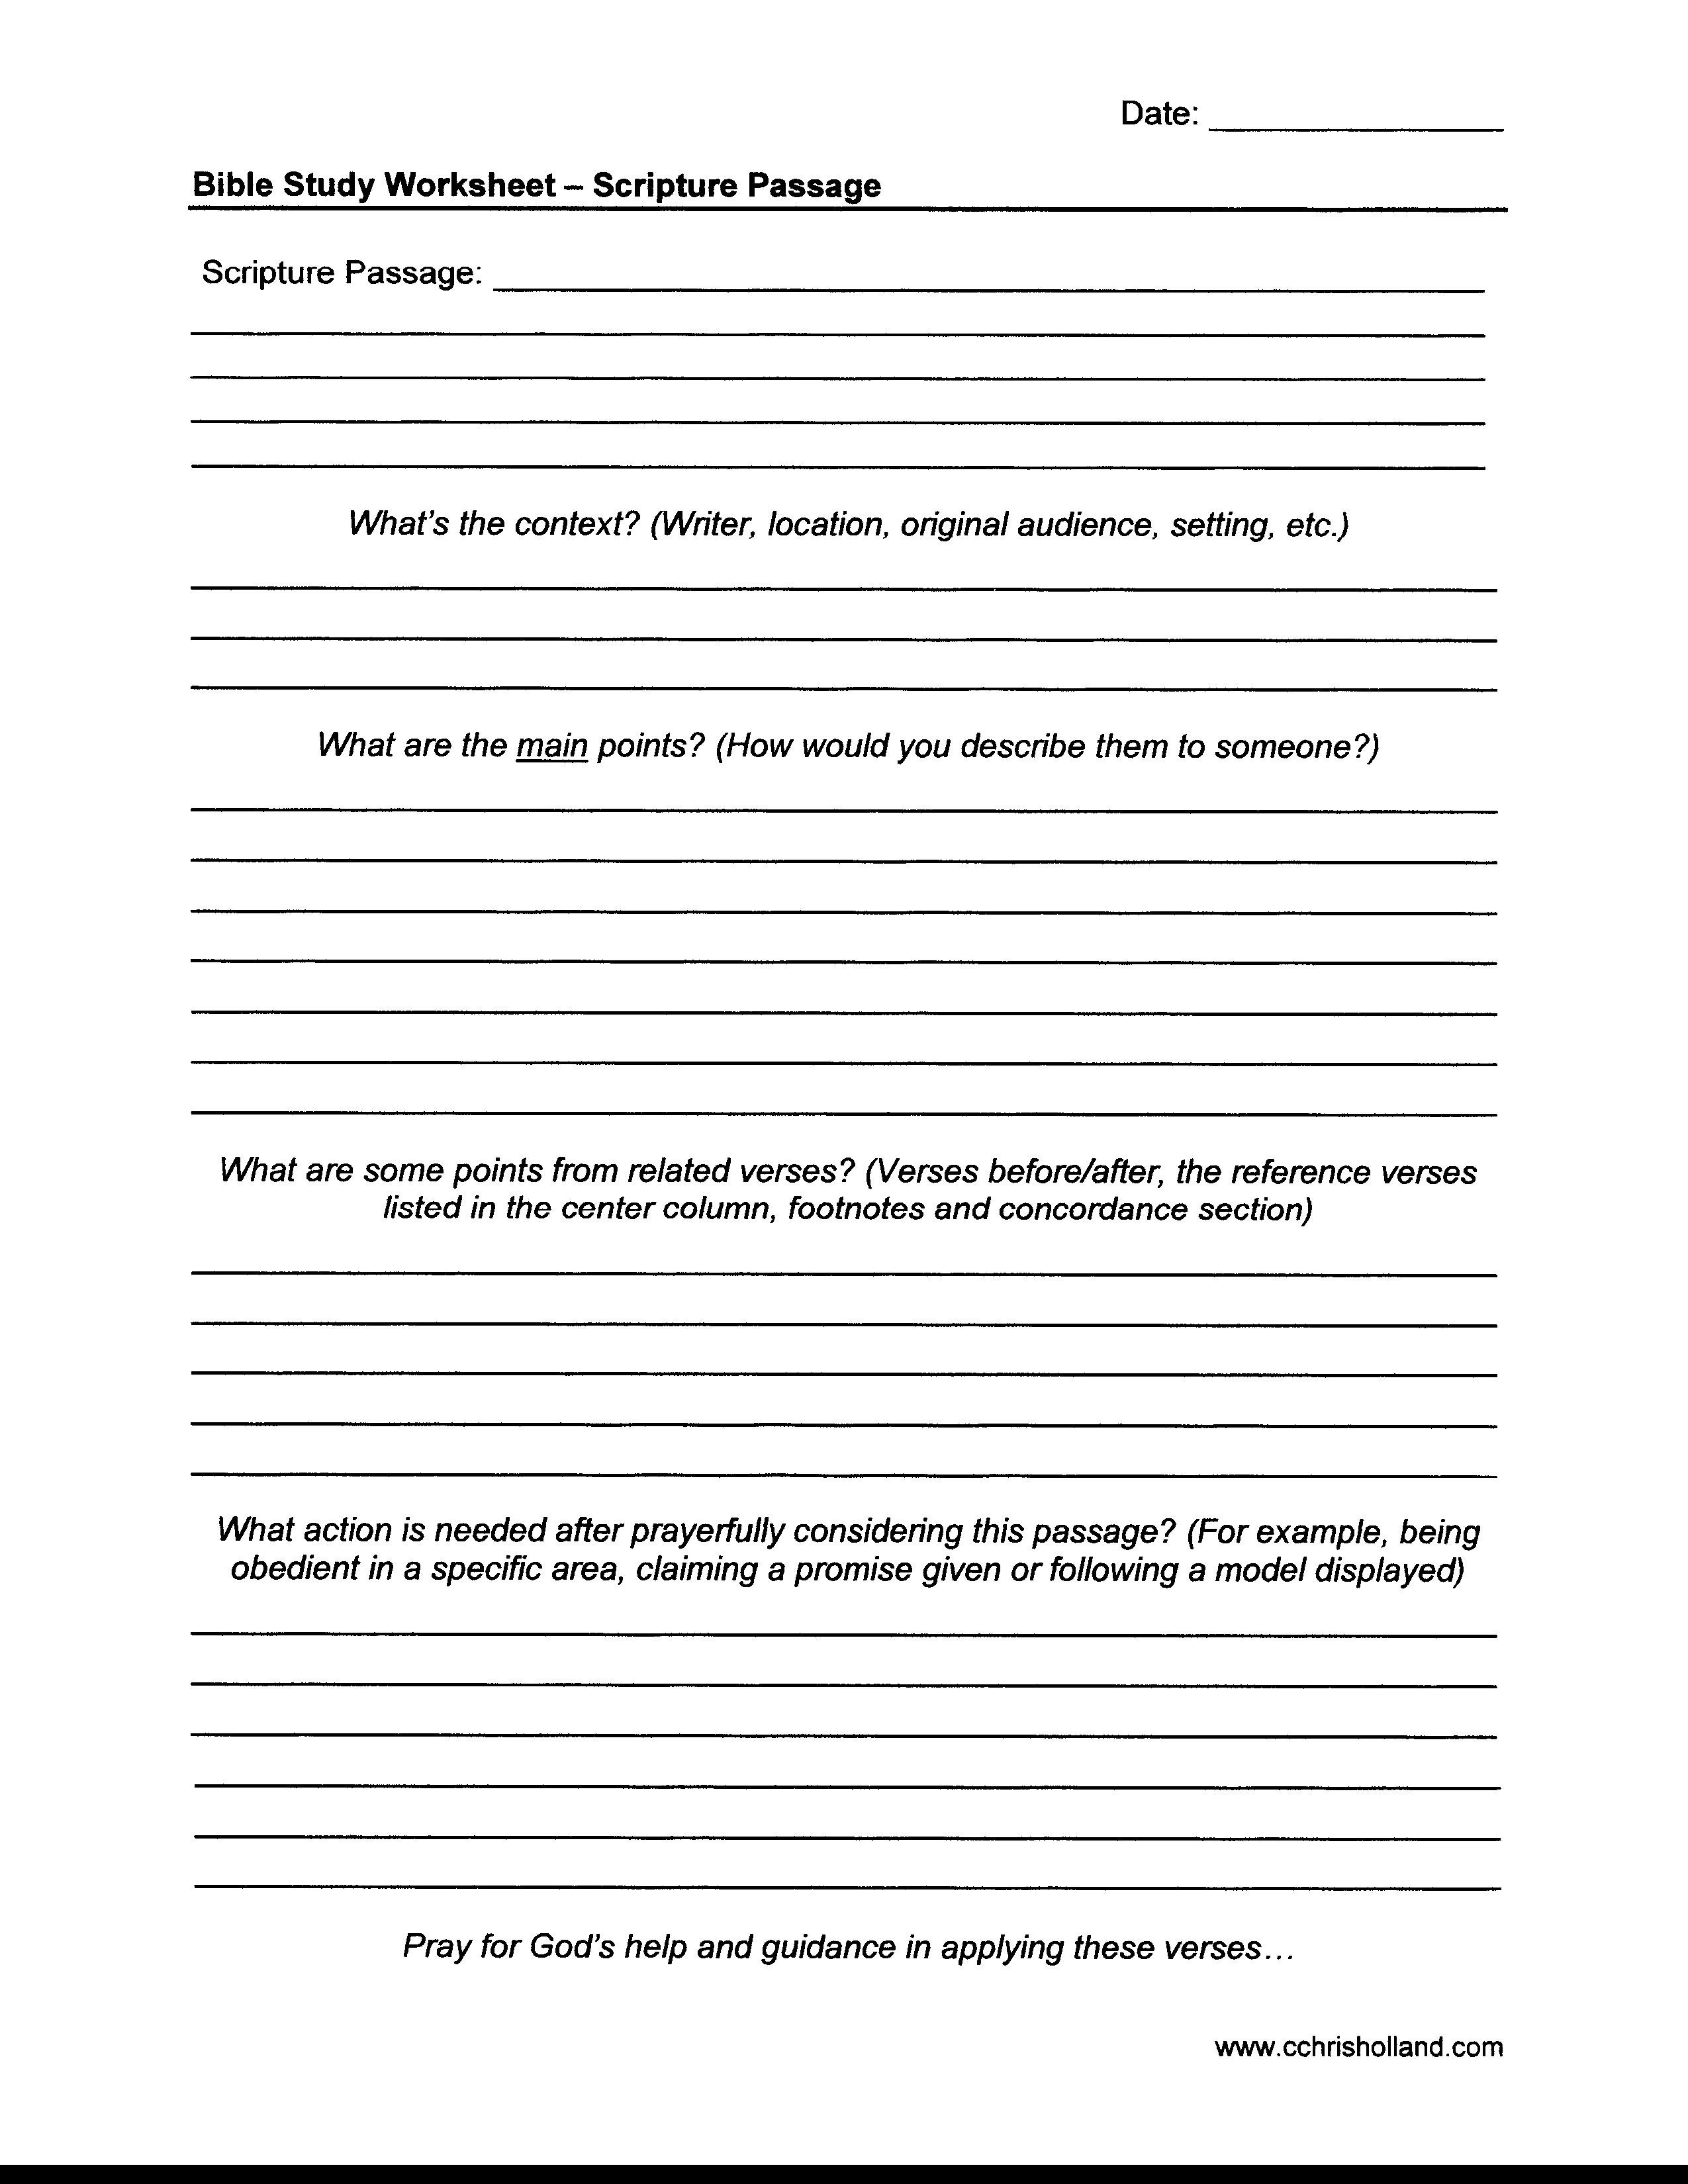 bible-study-worksheets-for-adults-pdf-db-excel